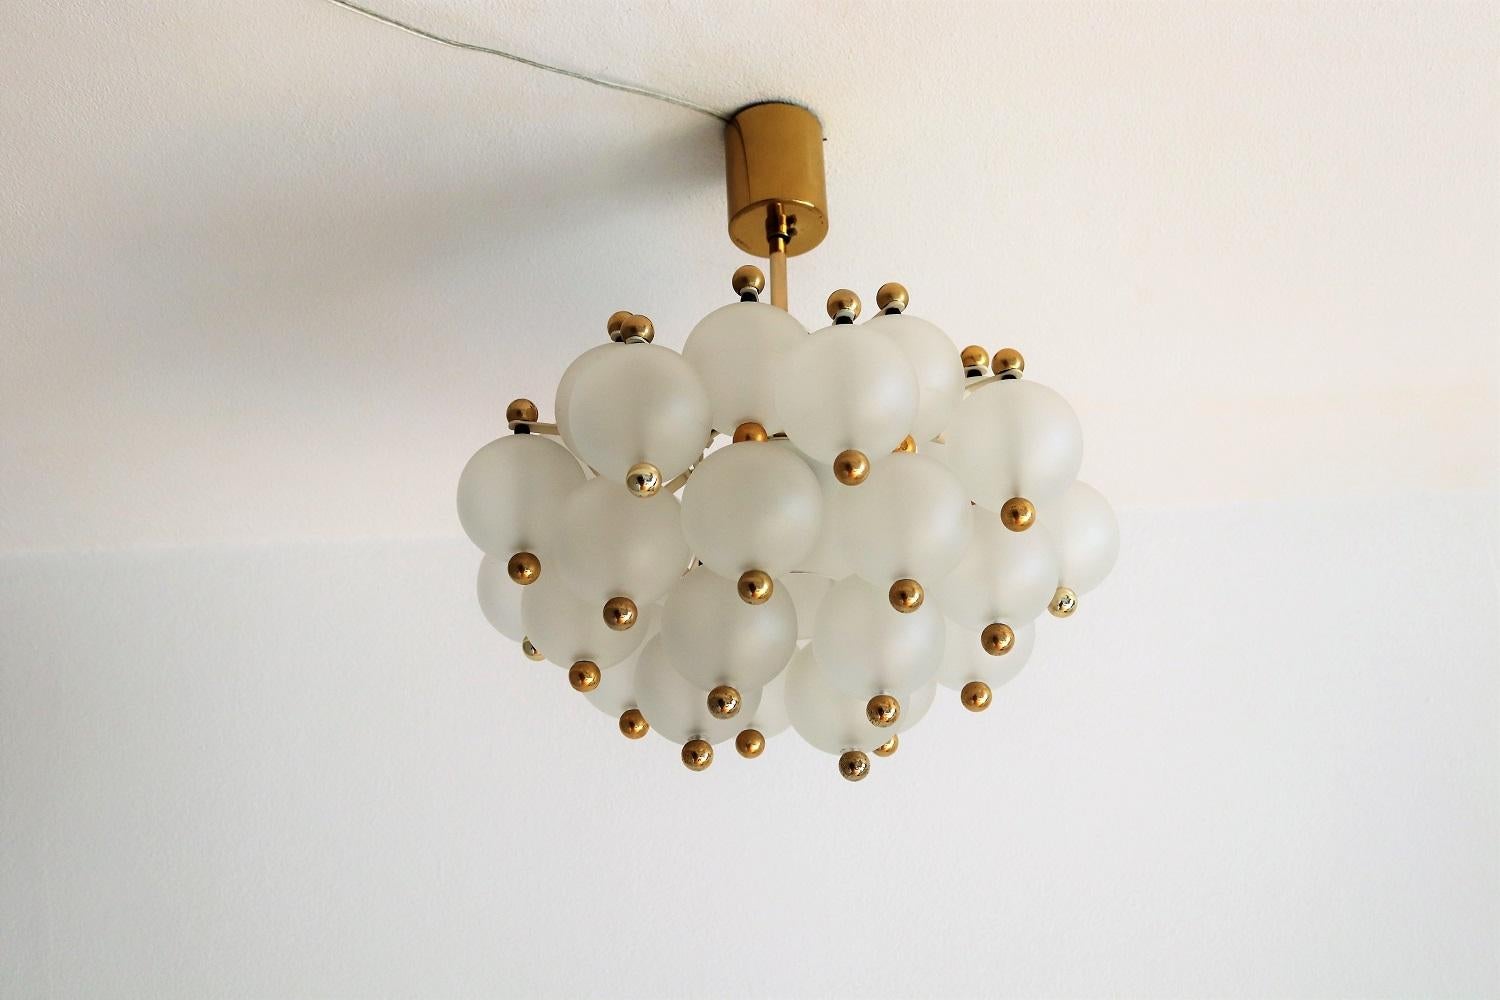 Beautiful complete chandelier with 31 frosted glass balls and one dome center glass, made in Germany in the 1970s by Kinkeldey.
The chandelier has a metal frame with brass bar to ceiling and brass ceiling rose. The golden smalls balls are varnished